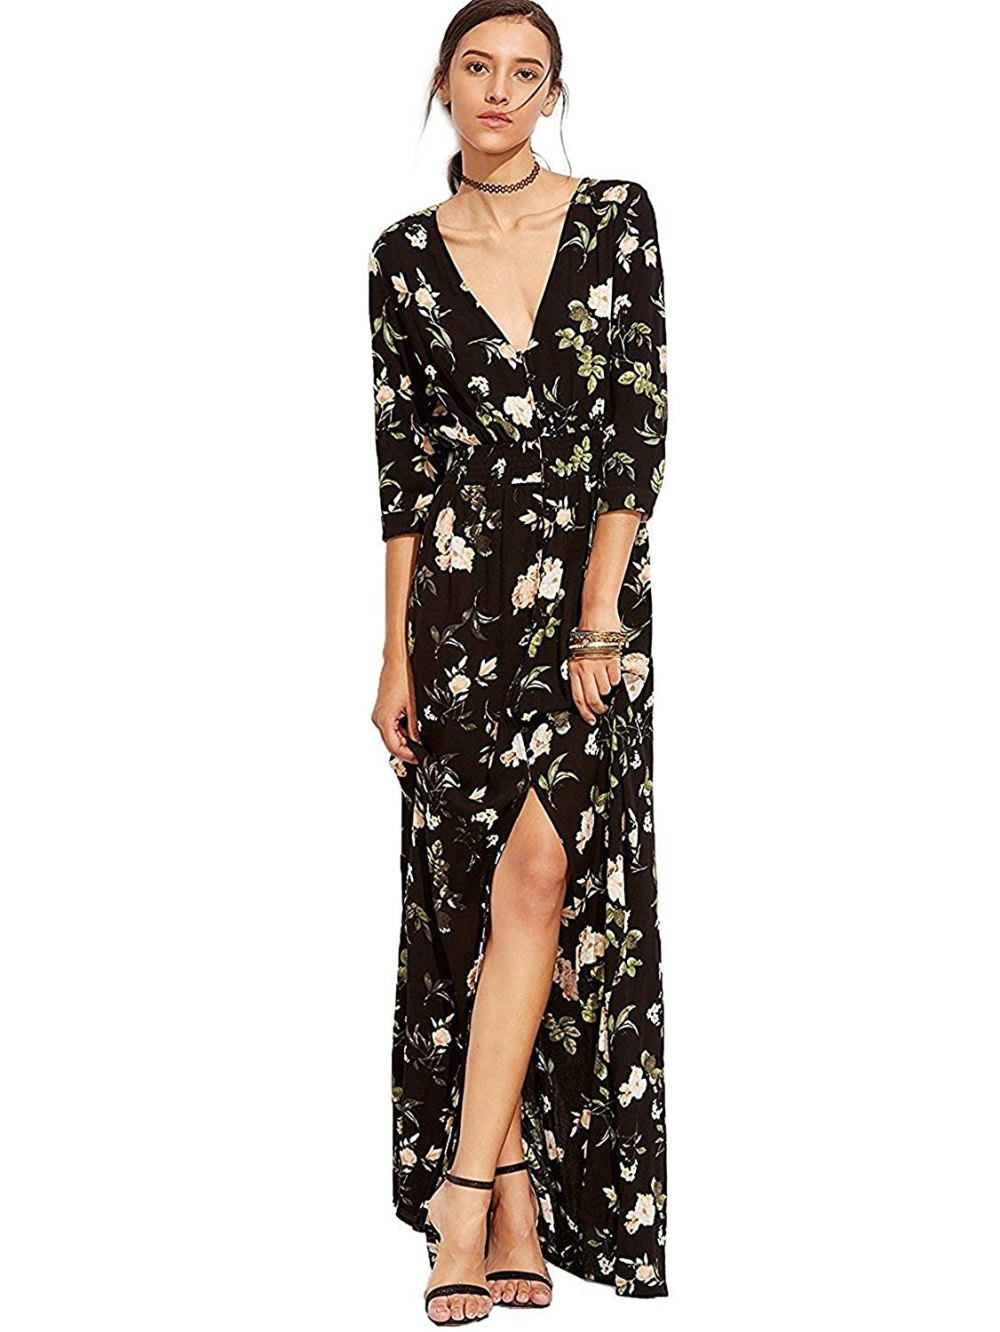 Nearly 3,000 Amazon Reviewers Love This Insanely Affordable Maxi Dress ...